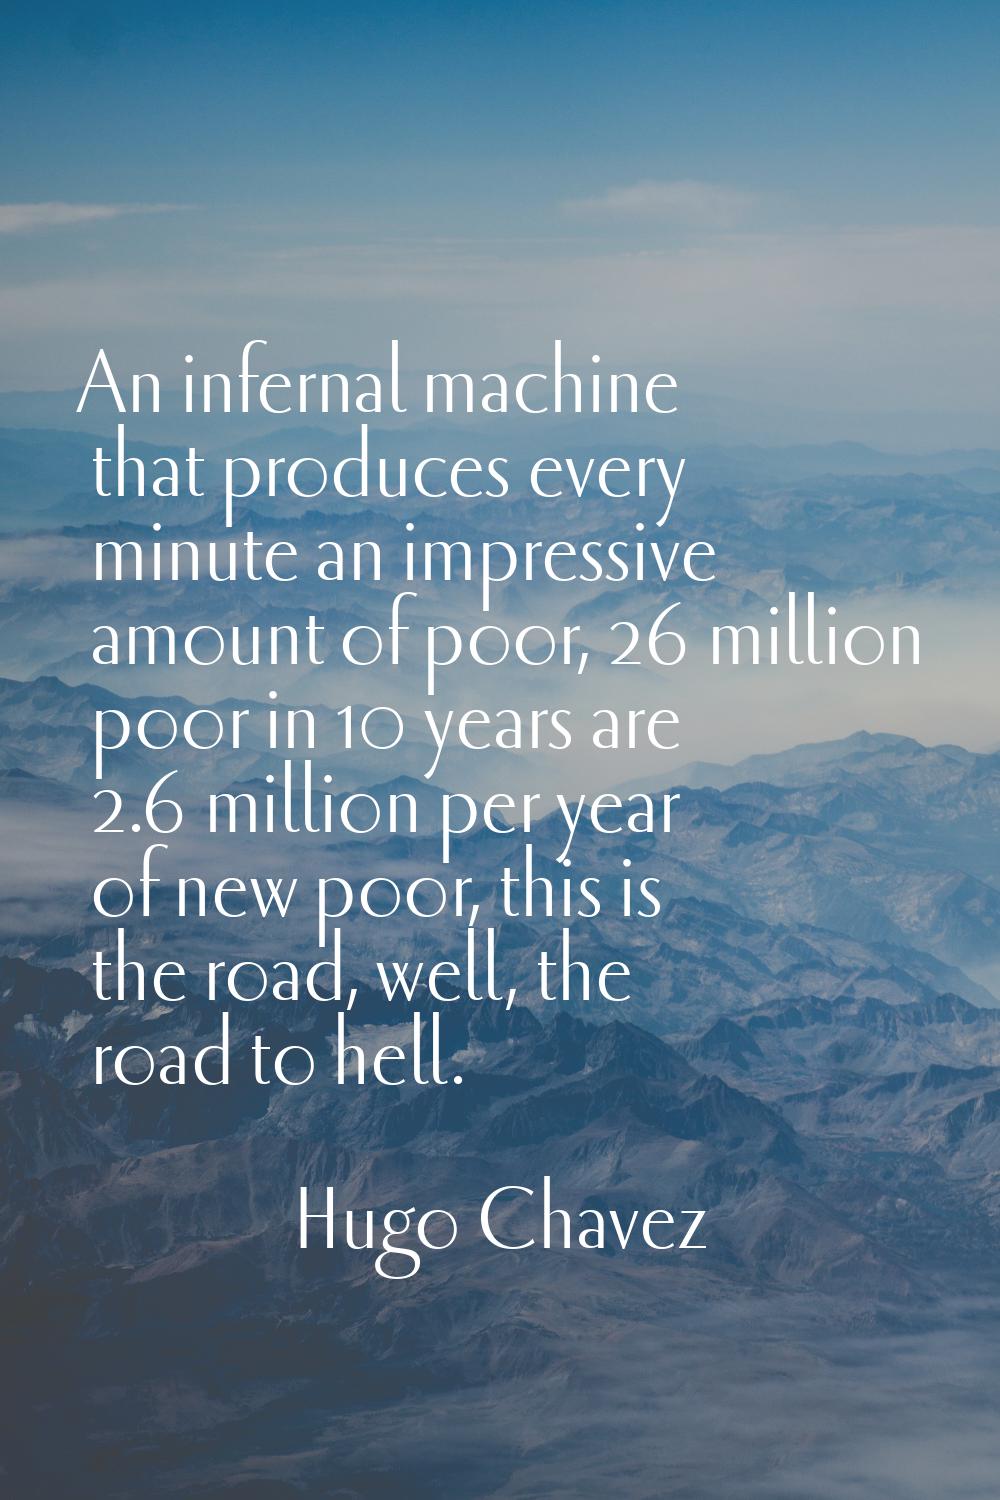 An infernal machine that produces every minute an impressive amount of poor, 26 million poor in 10 